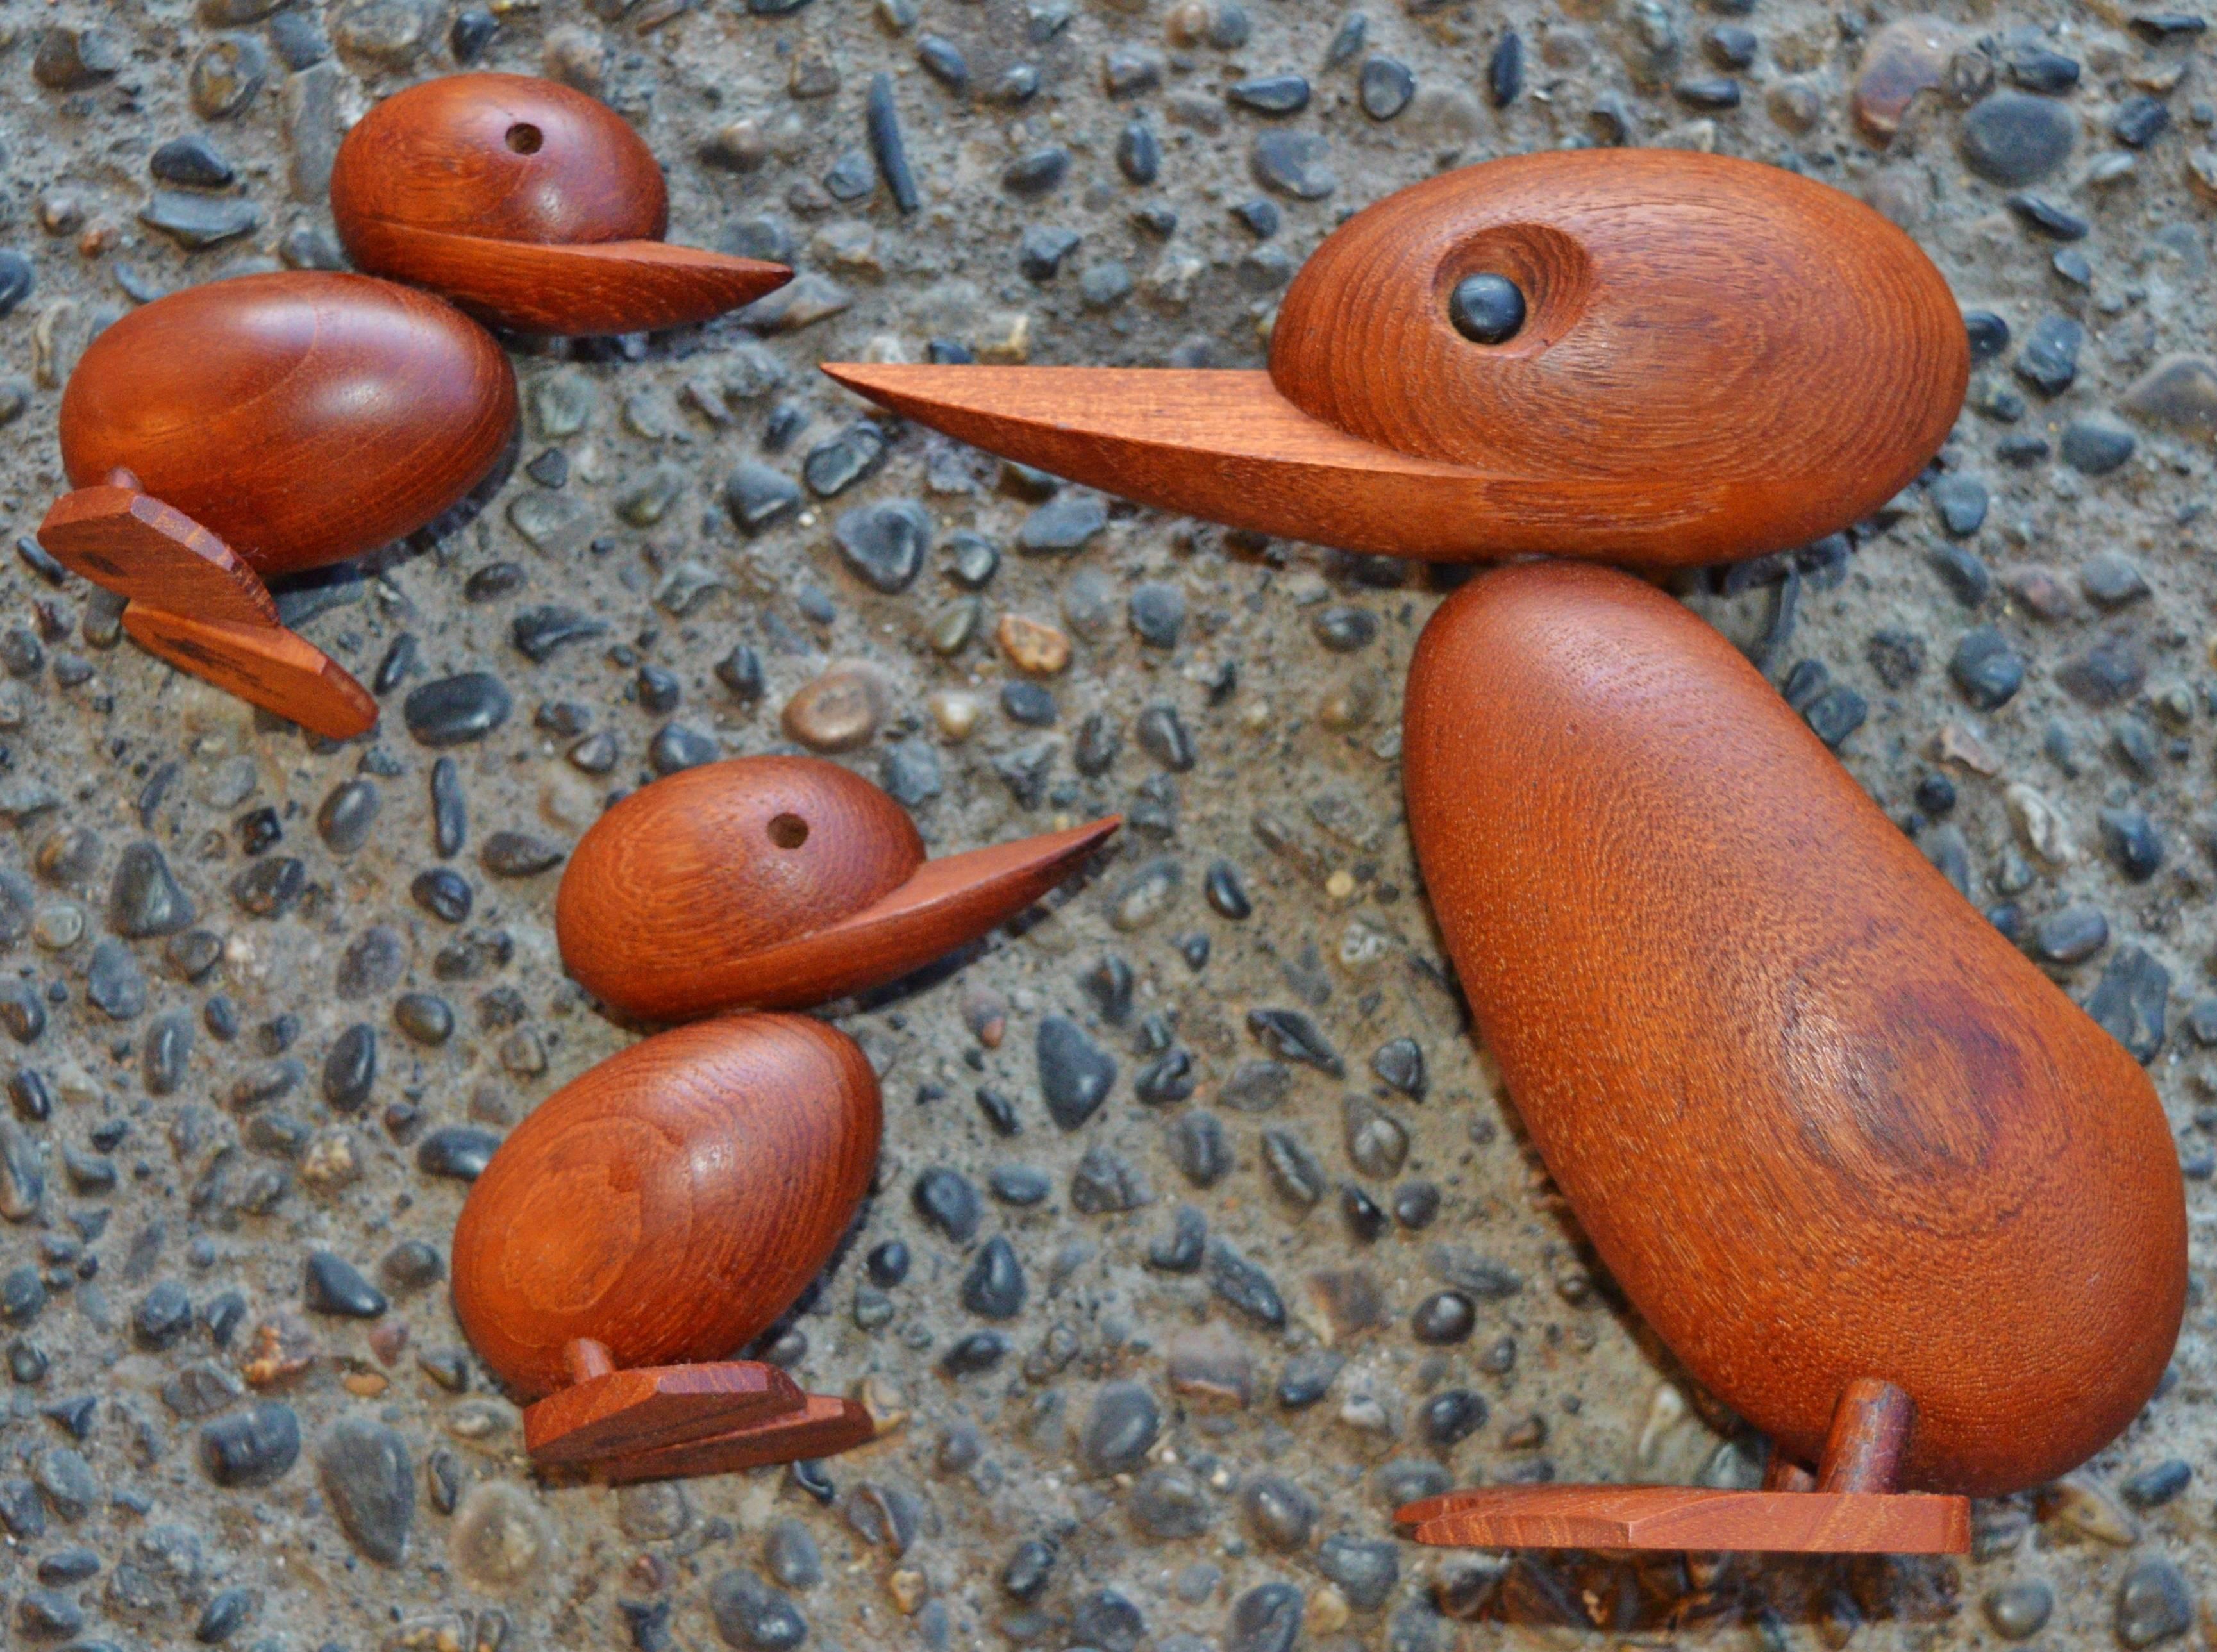 For offer is a Danish teak duck and a pair of duckling figures by Hans Bolling. A classic wooden Danish design toy who can resist these adorable duck and duckling figures? In the Spring of 1959, a policeman stopped the traffic in a busy street in